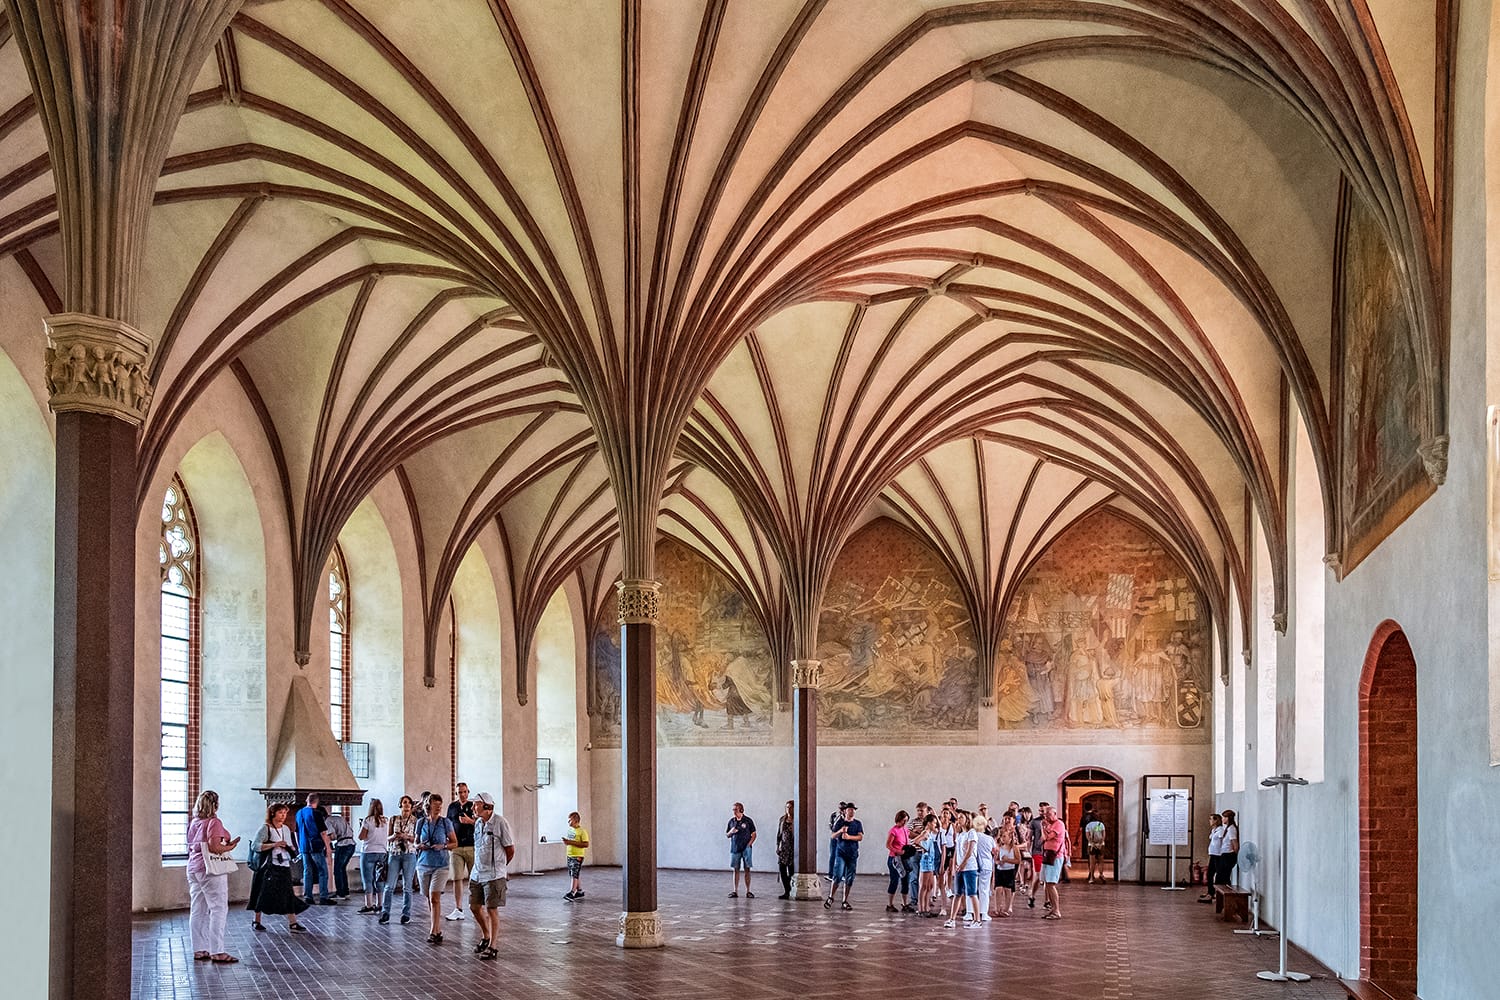 Interior of the Grand Dining Chamber in the Middle Castle part of the Medieval Teutonic Order castle and monastery in Malbork, Poland